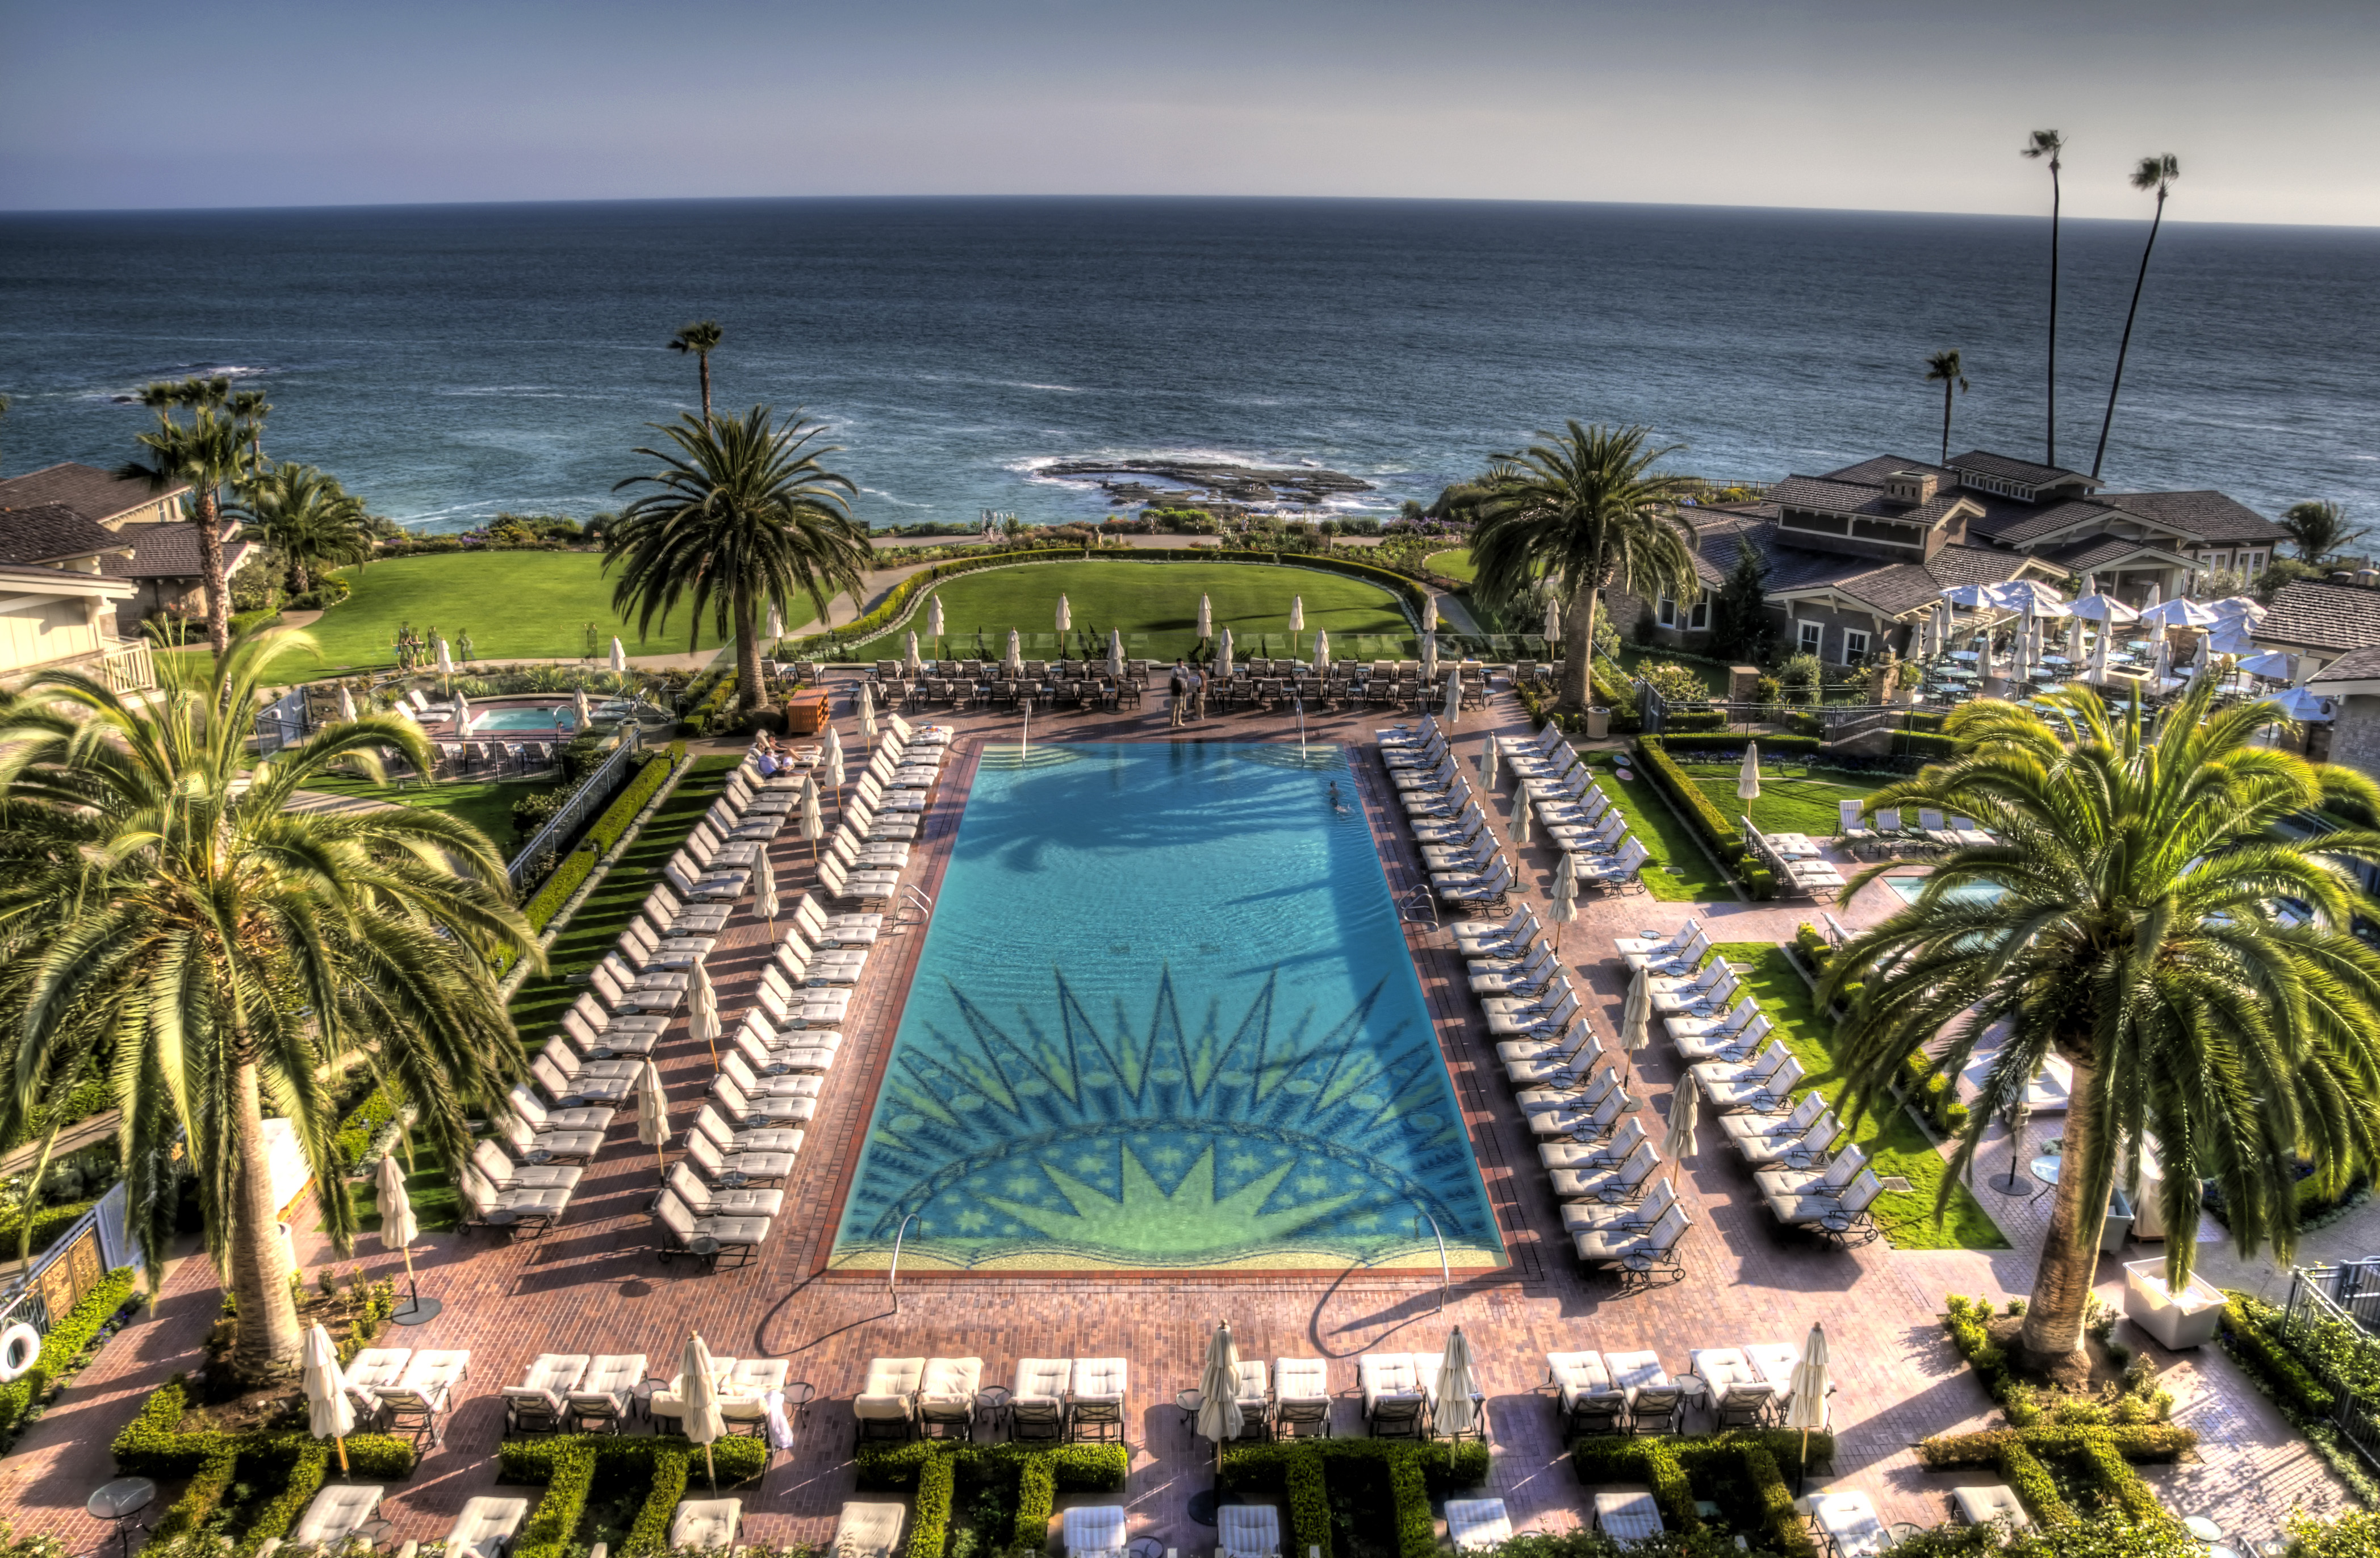 Best Beach Resorts & Hotels of Southern California